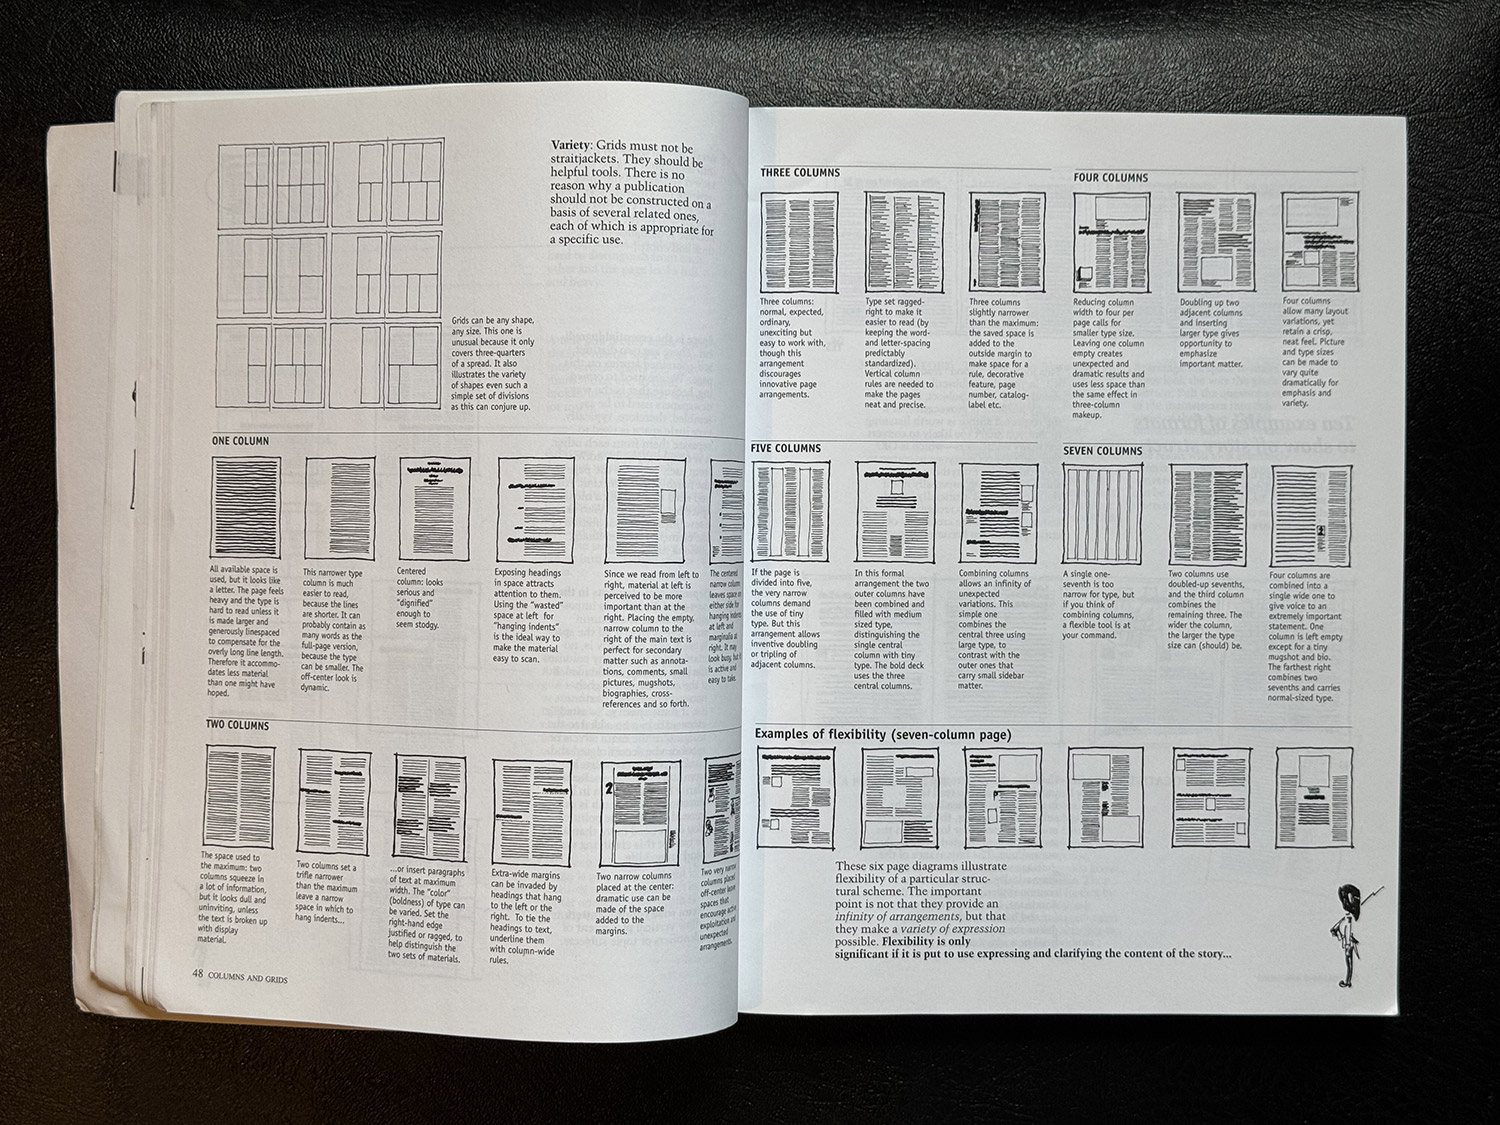 photograph of an open book, showing many many hand-drawn diagrams of how different layouts can use different numbers of columns 